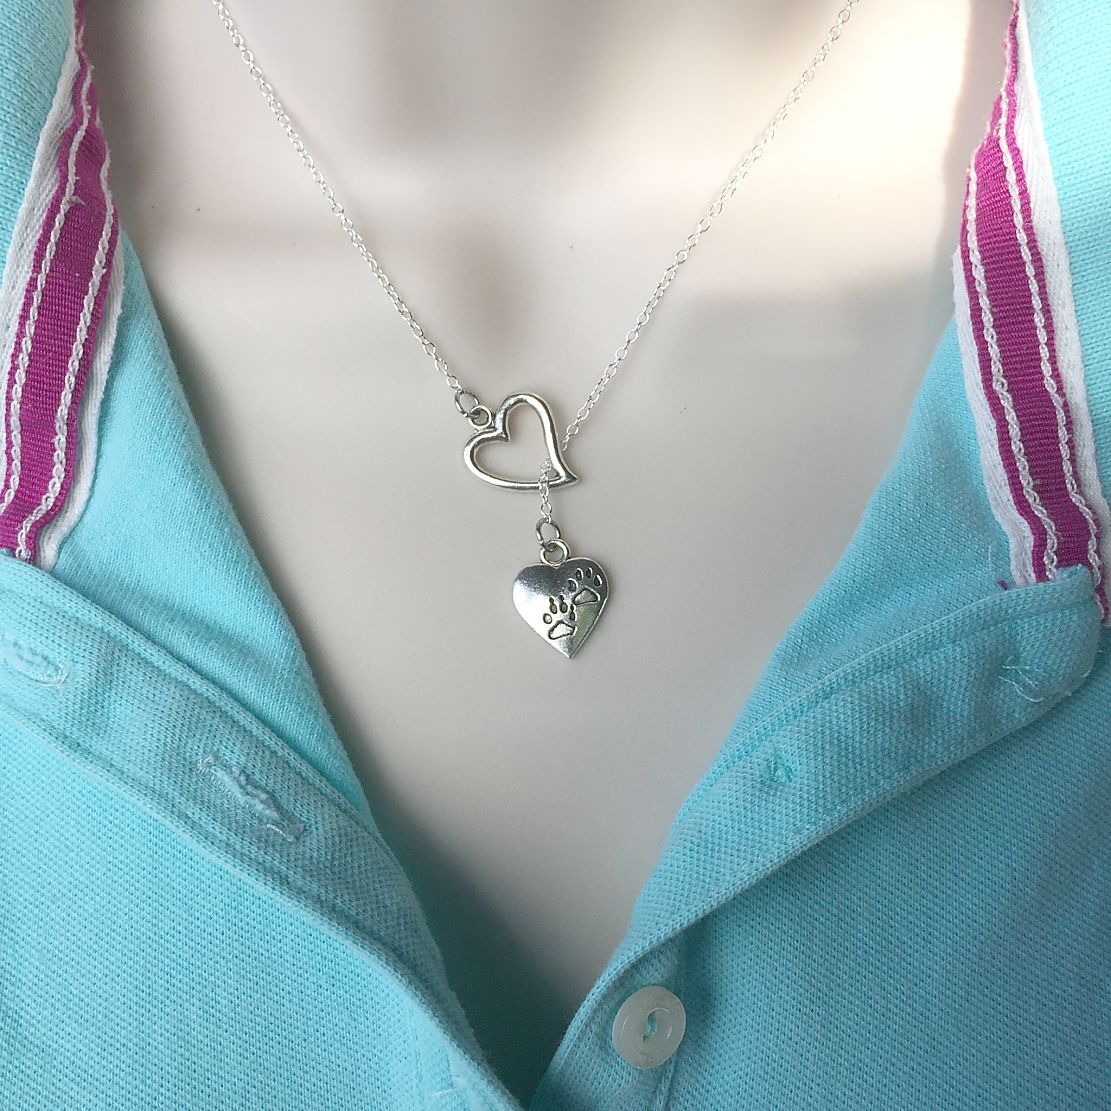 I Love Cats and Dogs Handcrafted Necklace Lariat Y Style.